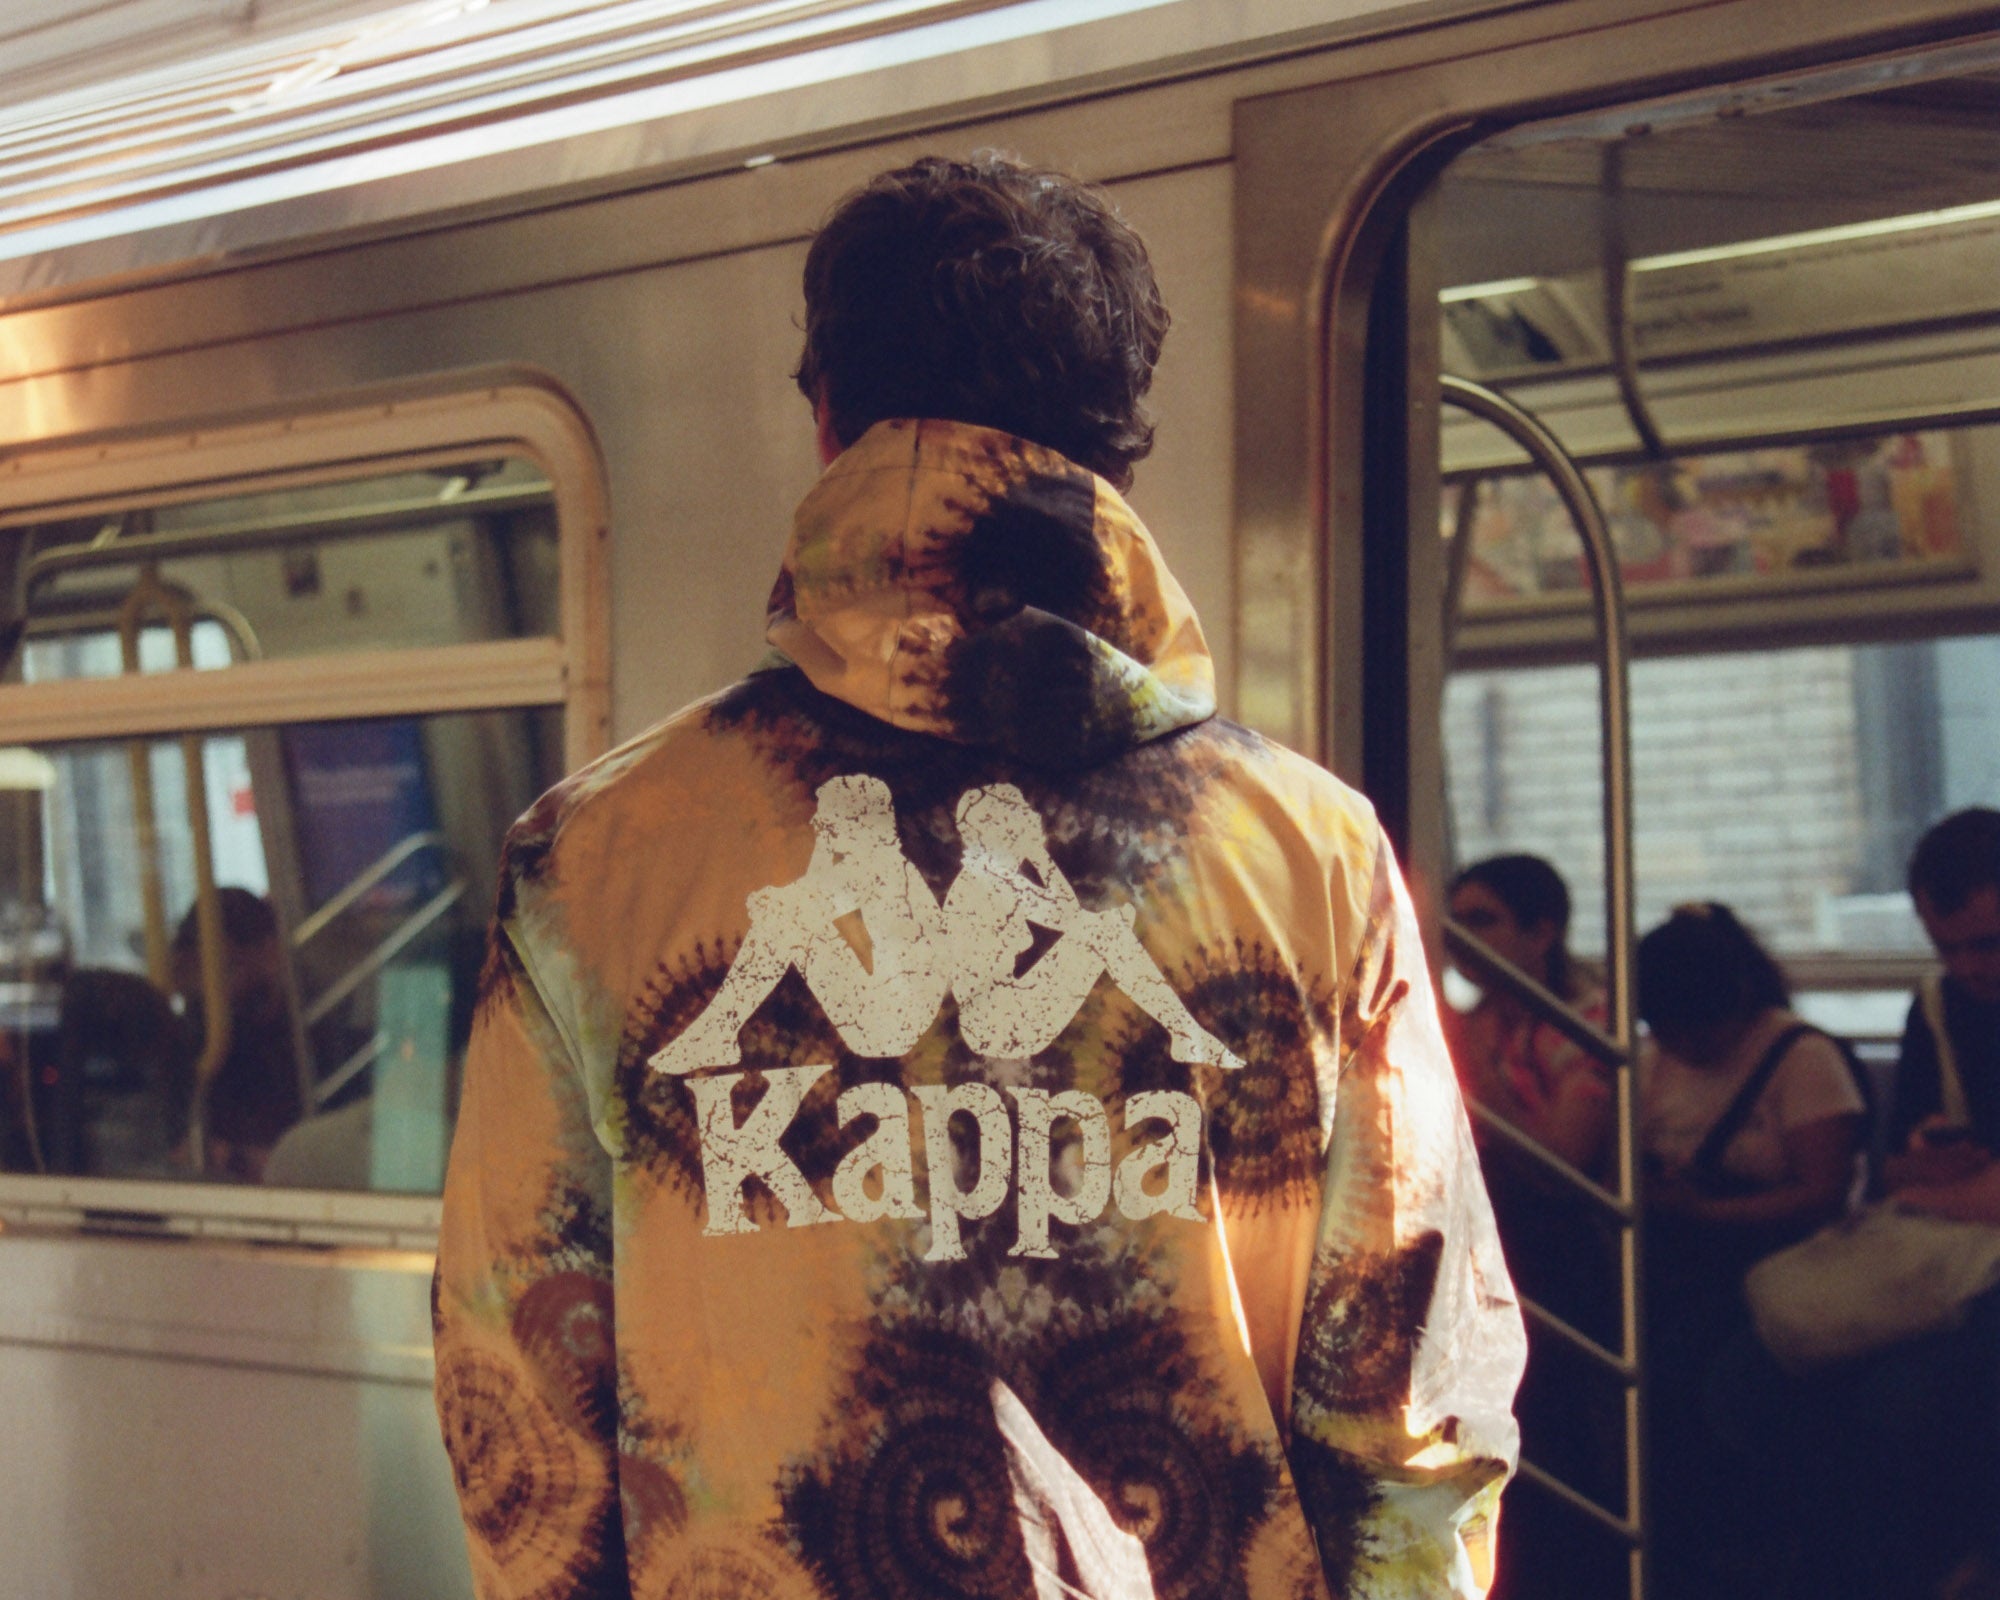  Kappa: Clothing & Accessories